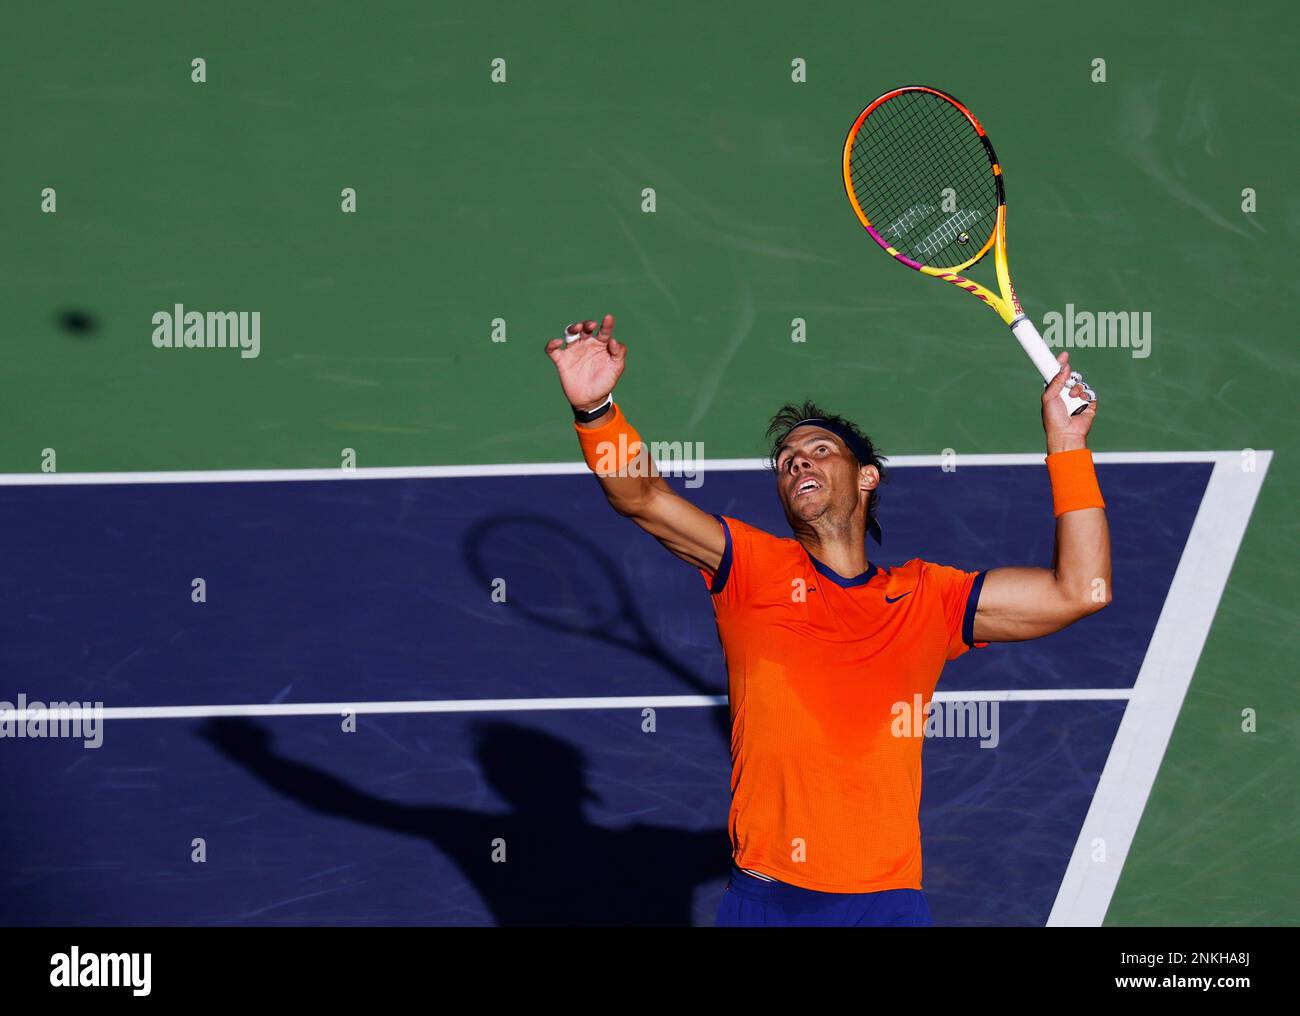 March 20, 2022 Rafael Nadal of Spain serves against Taylor Fritz during the finals match of the 2022 BNP Paribas Open at Indian Wells Tennis Garden in Indian Wells, California